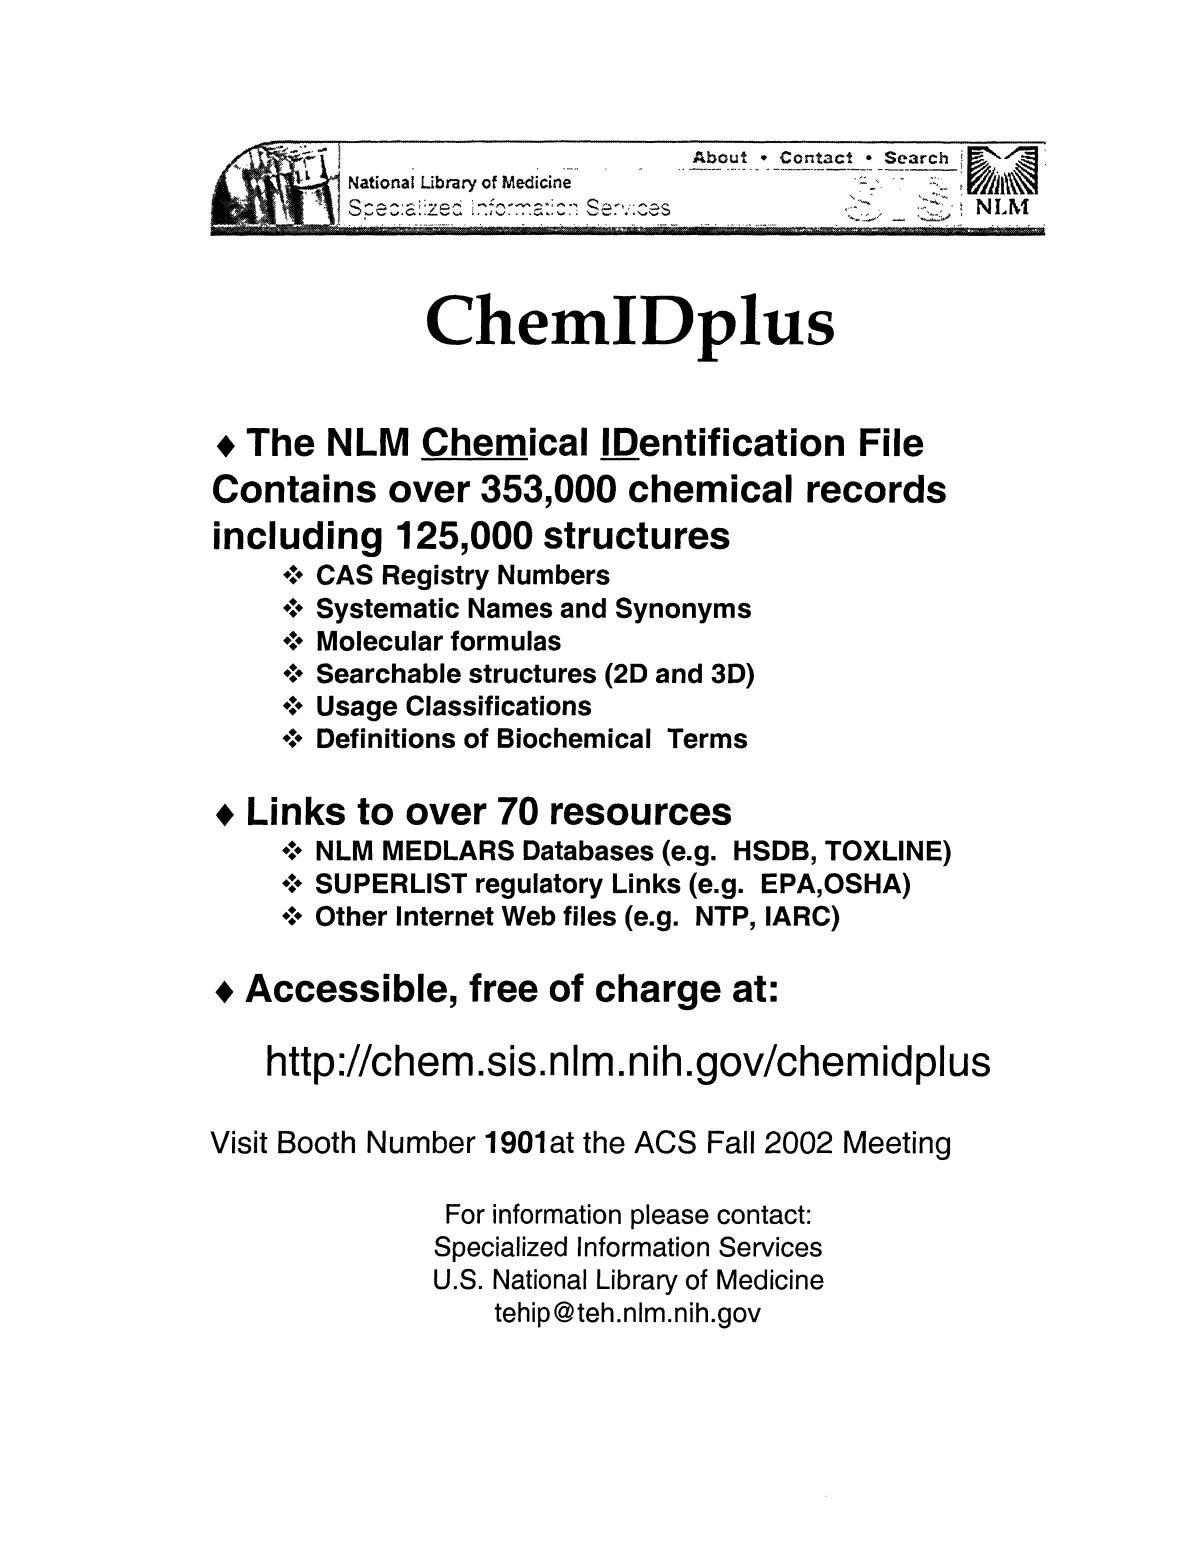 Chemical Information Bulletin, Volume 54, Number 2, Fall 2002
                                                
                                                    2
                                                